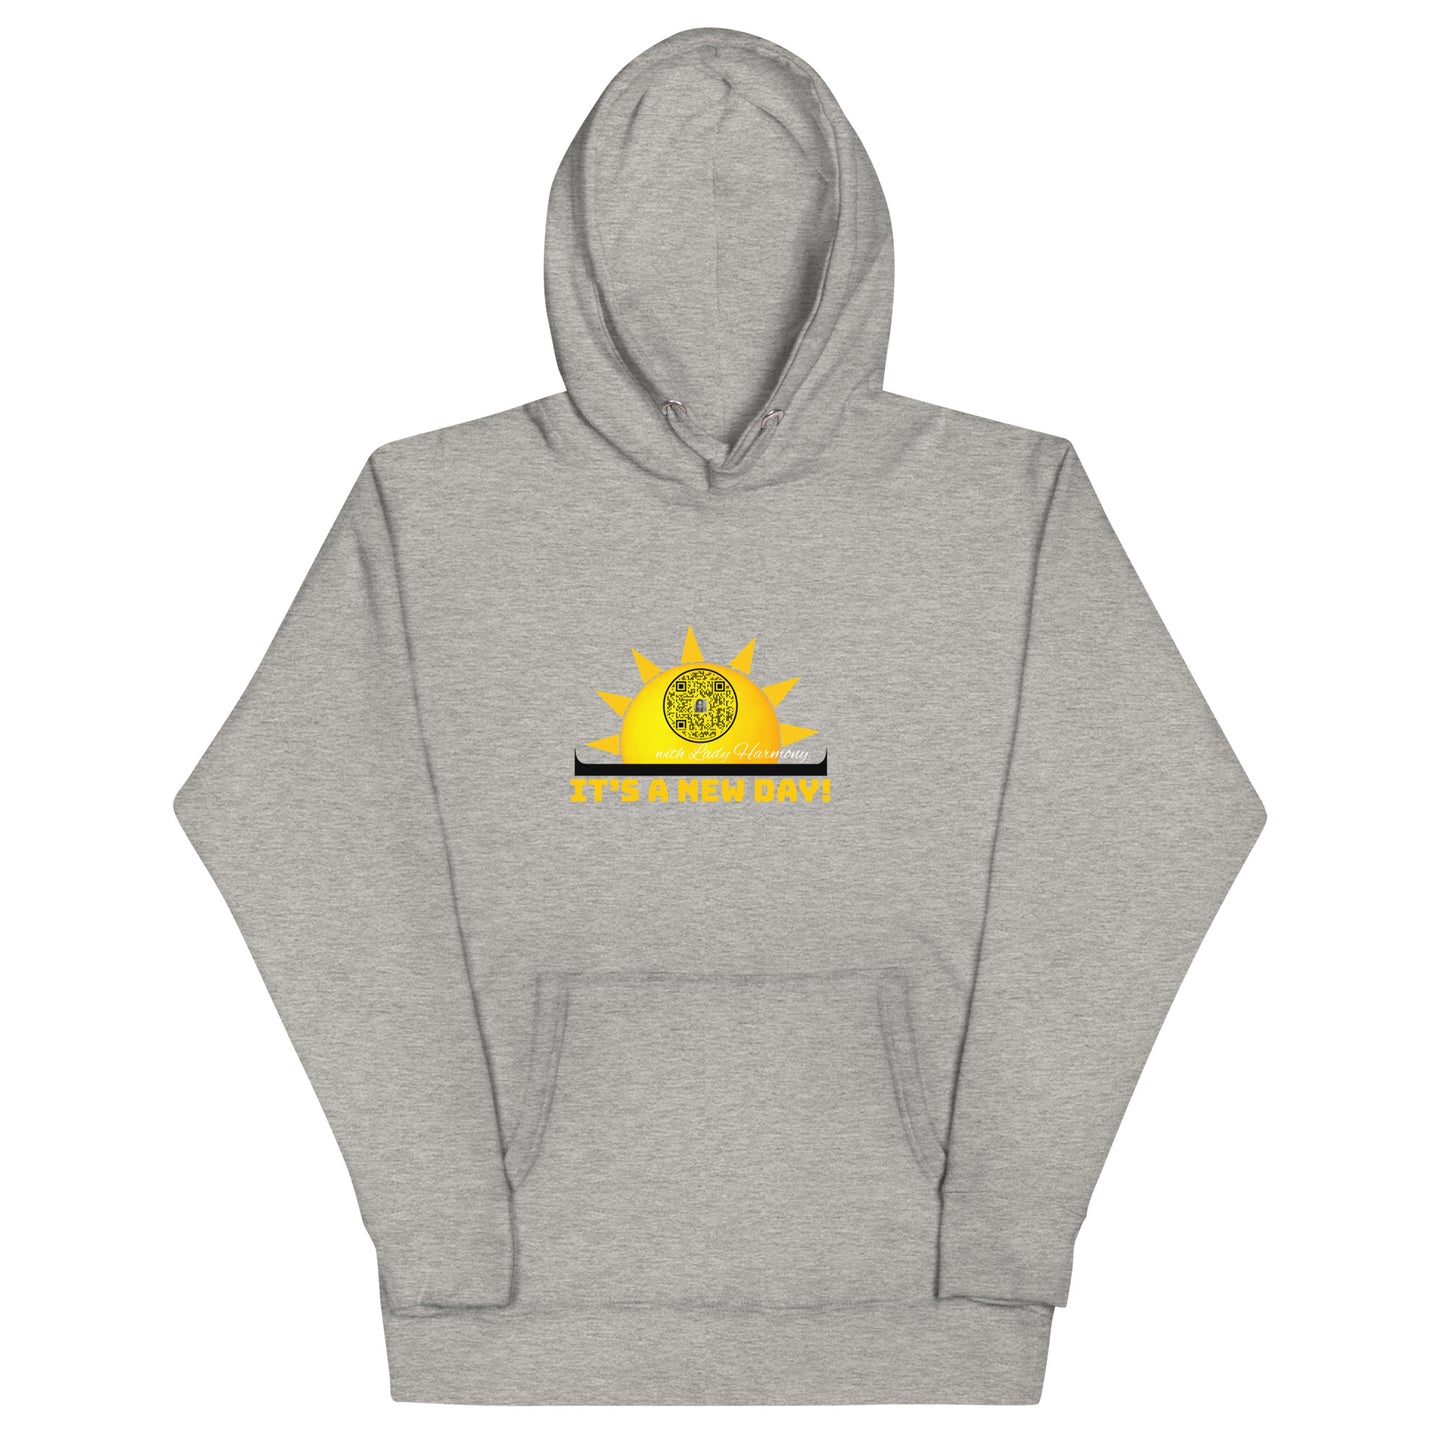 New day hoodie (grey)